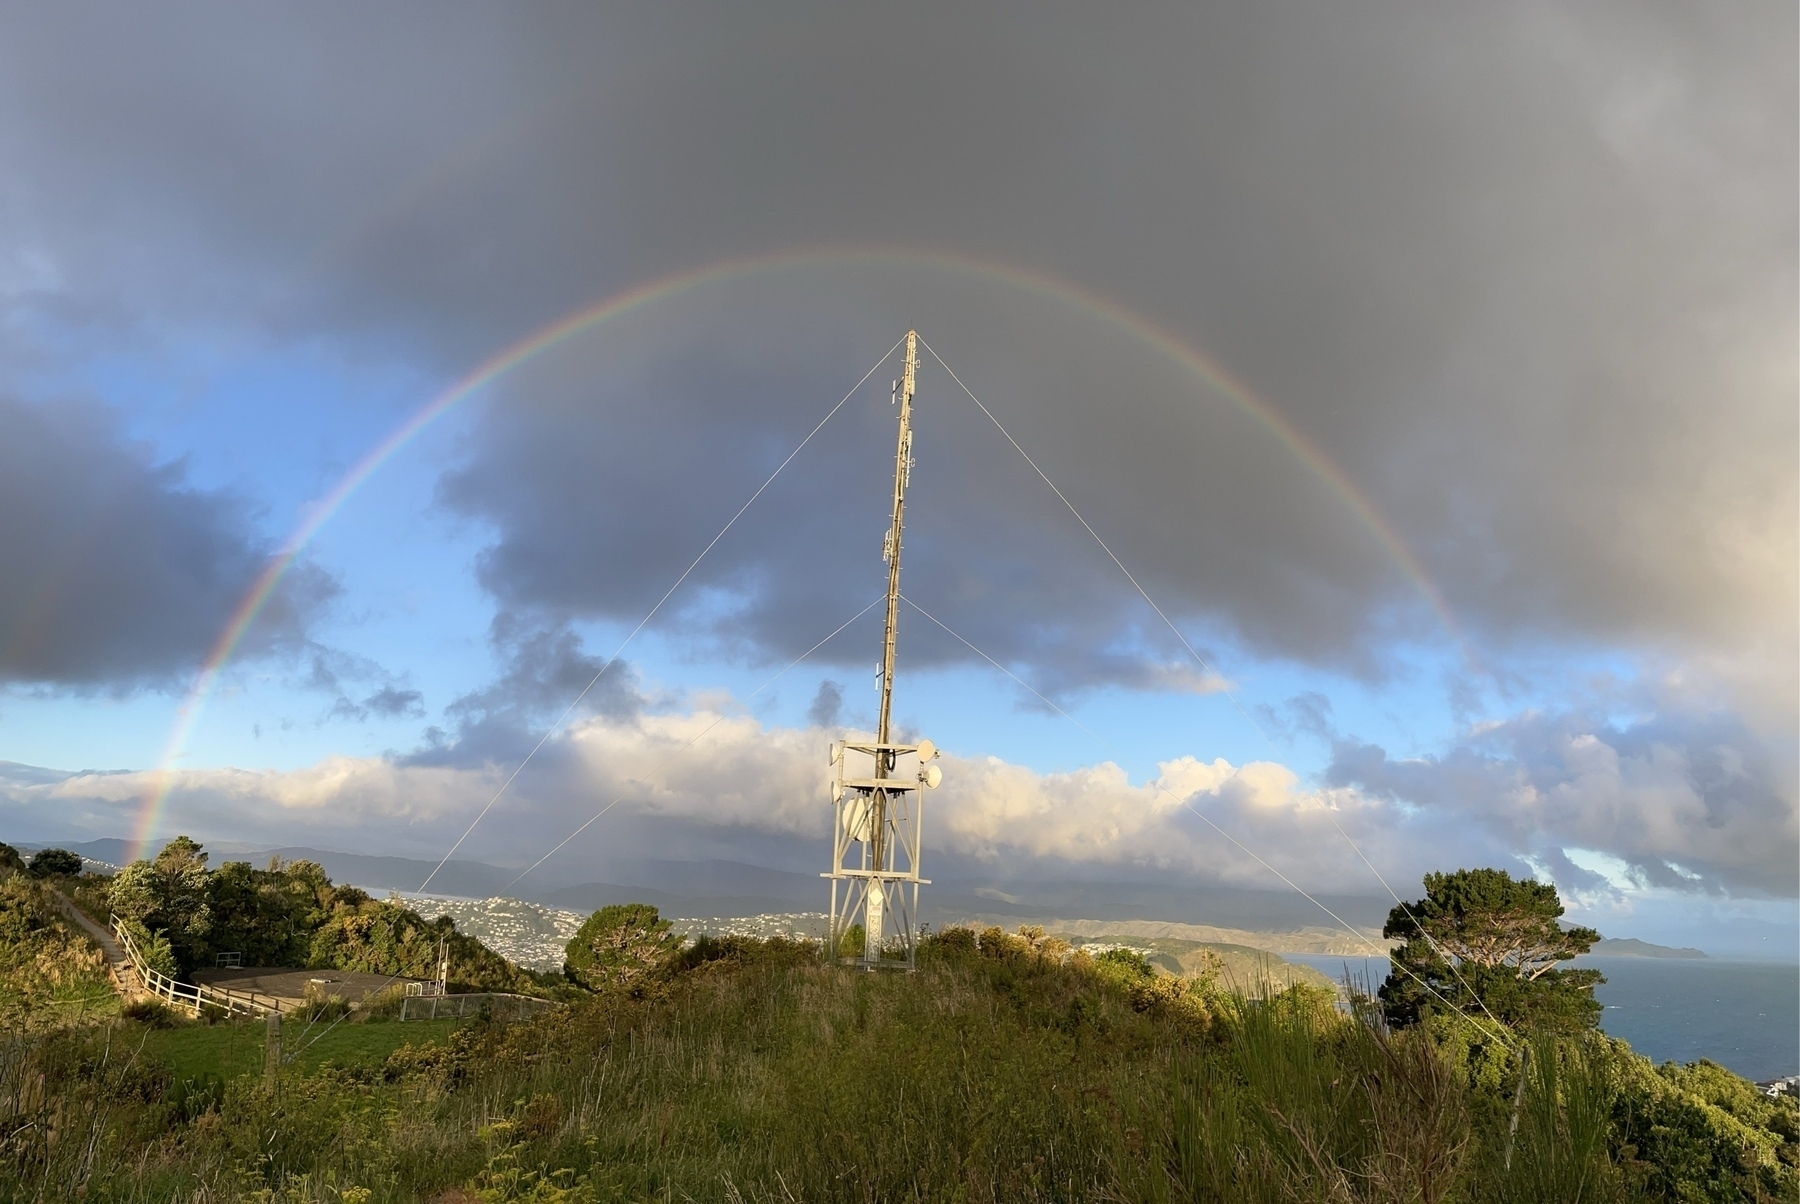 a rainbow with a communication tower in the middle likemhands on a clock